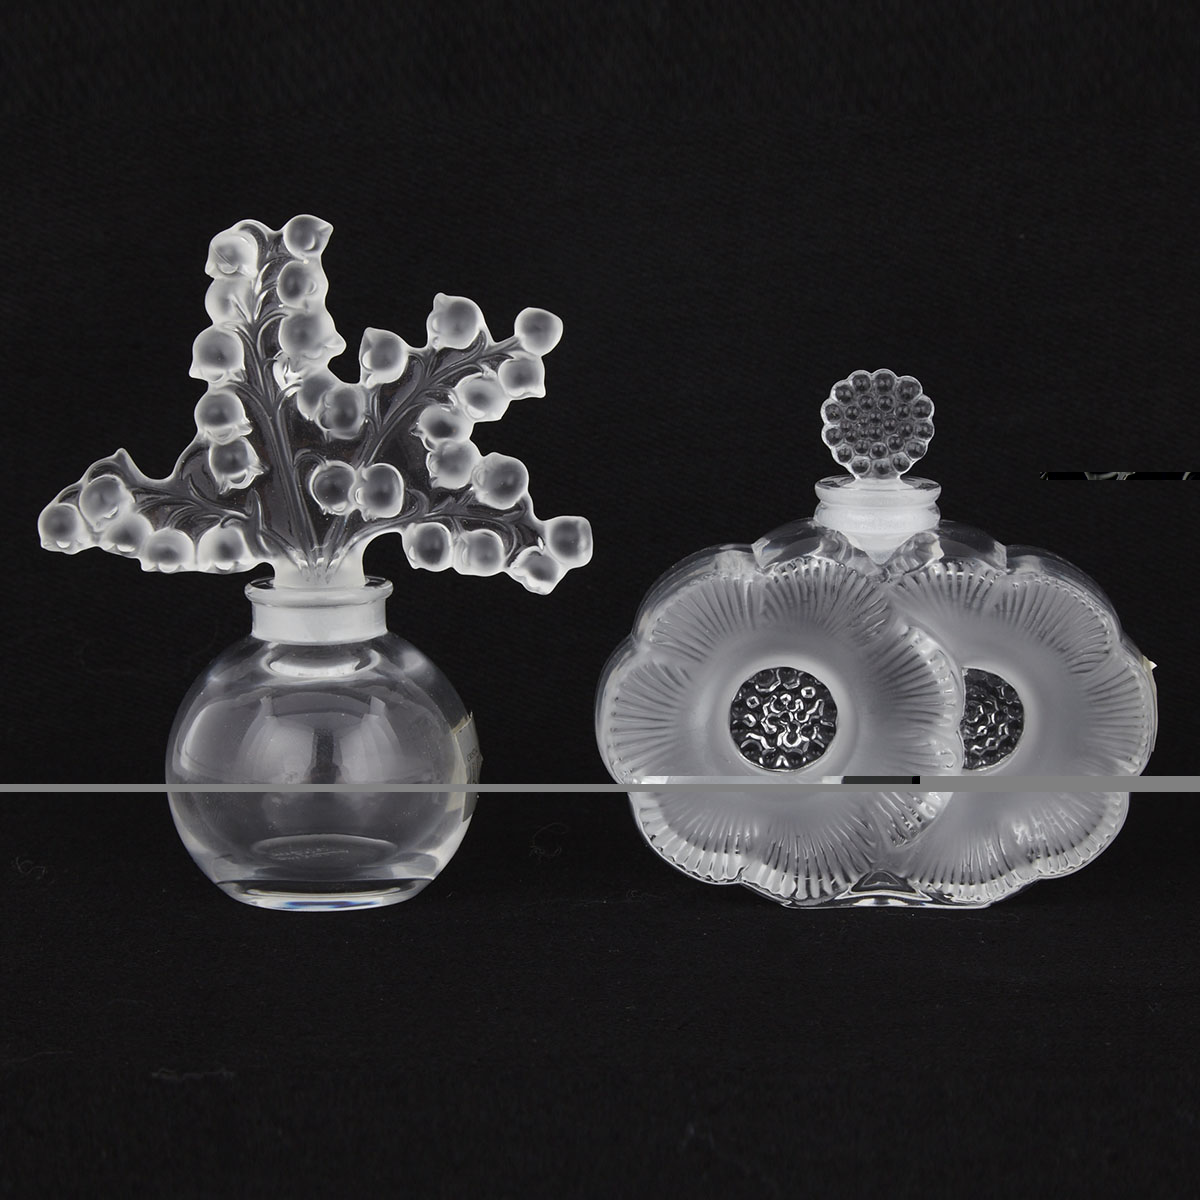 ‘Deux Fleurs’ and ‘Clairefontaine’, Two Lalique Glass Perfume Bottles, 20th century